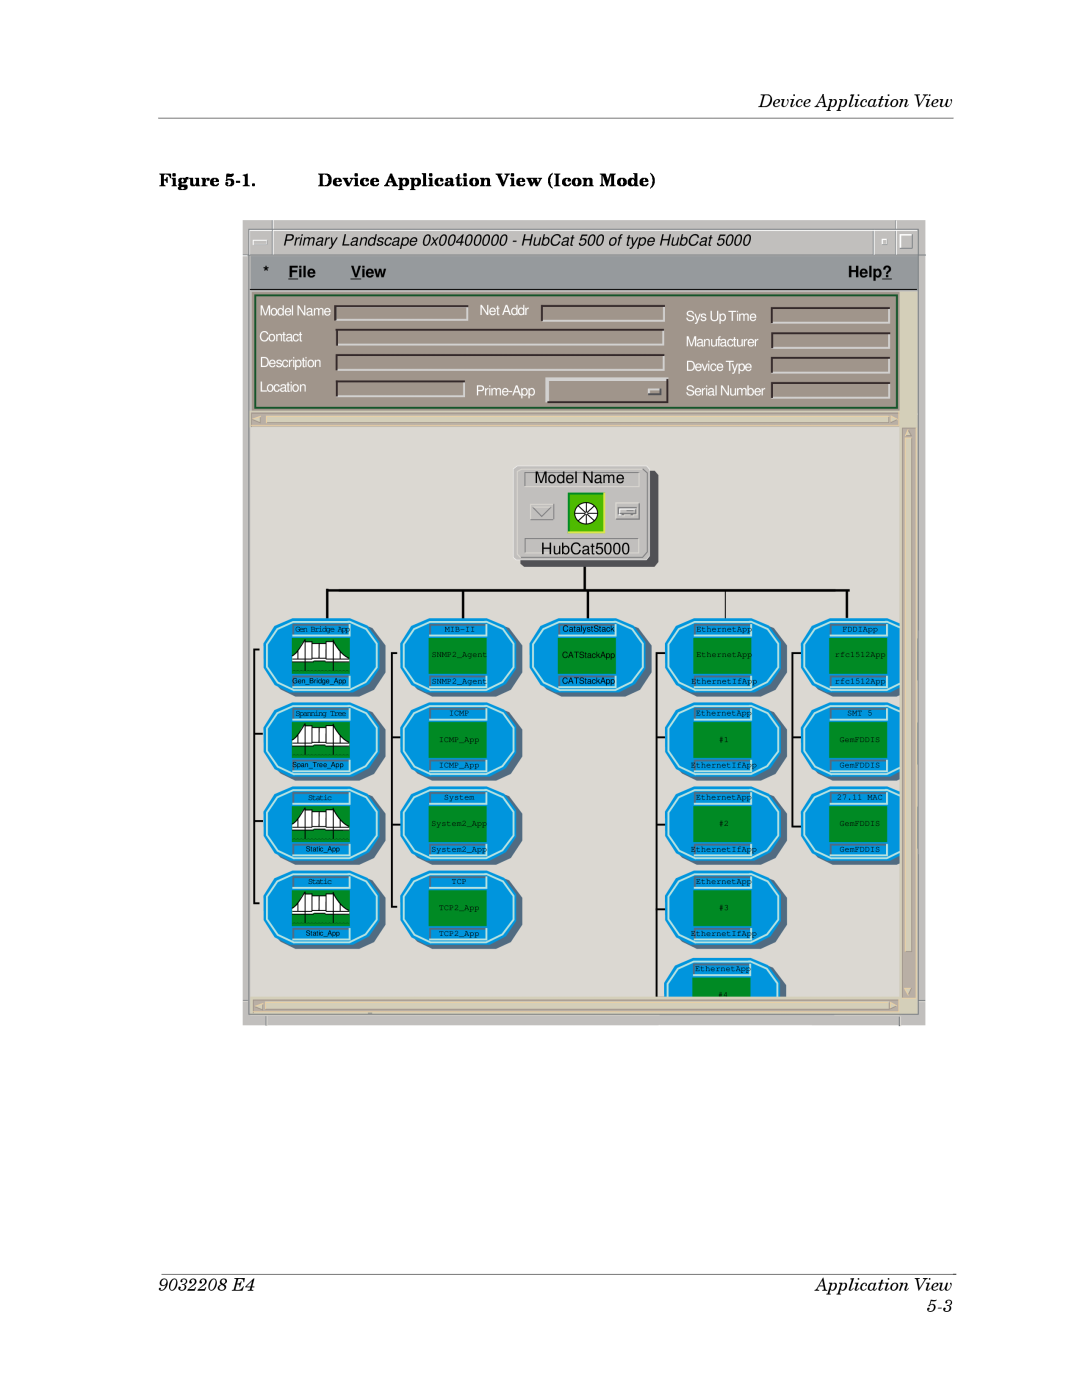 Cabletron Systems 5000, 5500 1. Device Application View Icon Mode, 9032208 E4, File, Help ?, Model Name, HubCat5000, Icmp 